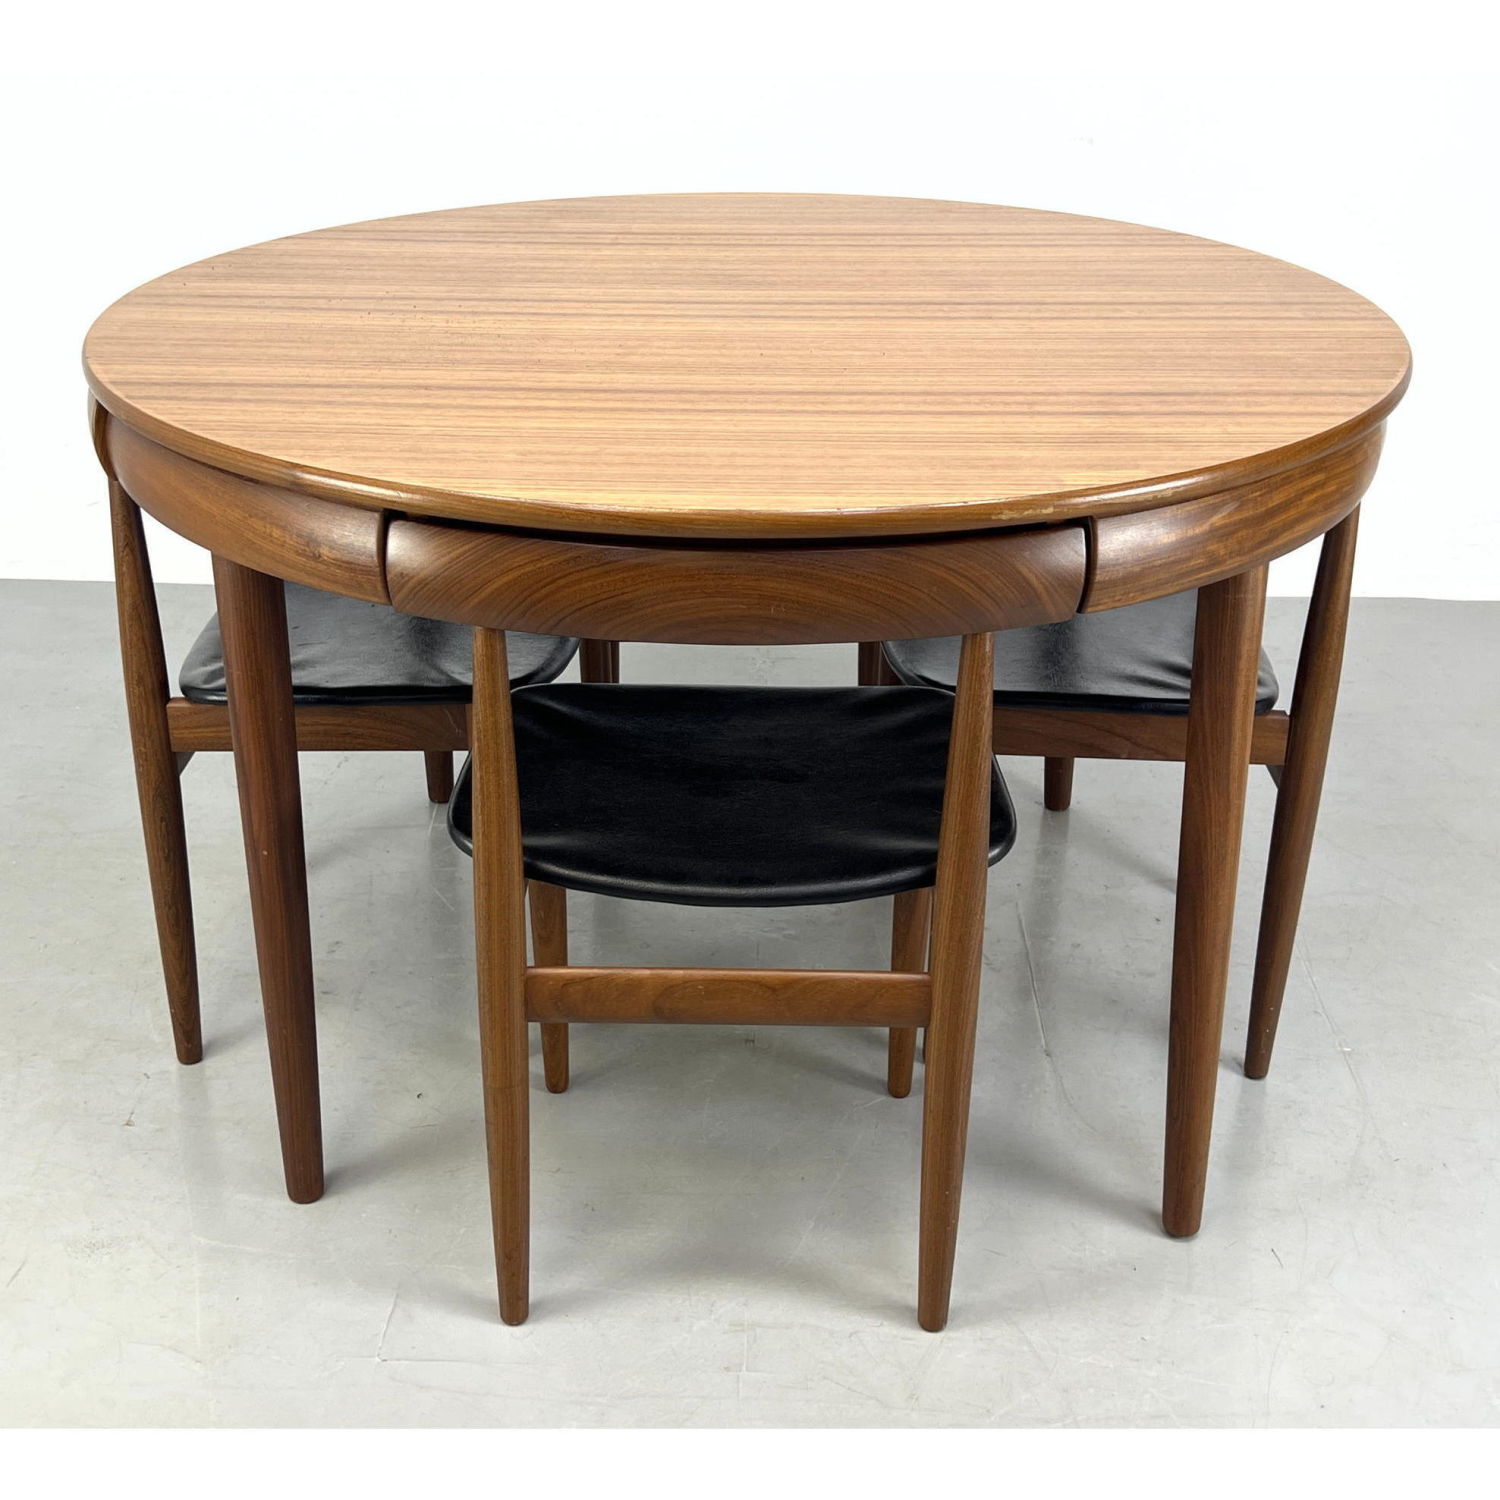 FREM ROJLE Dining Table and Chairs  2b99e8